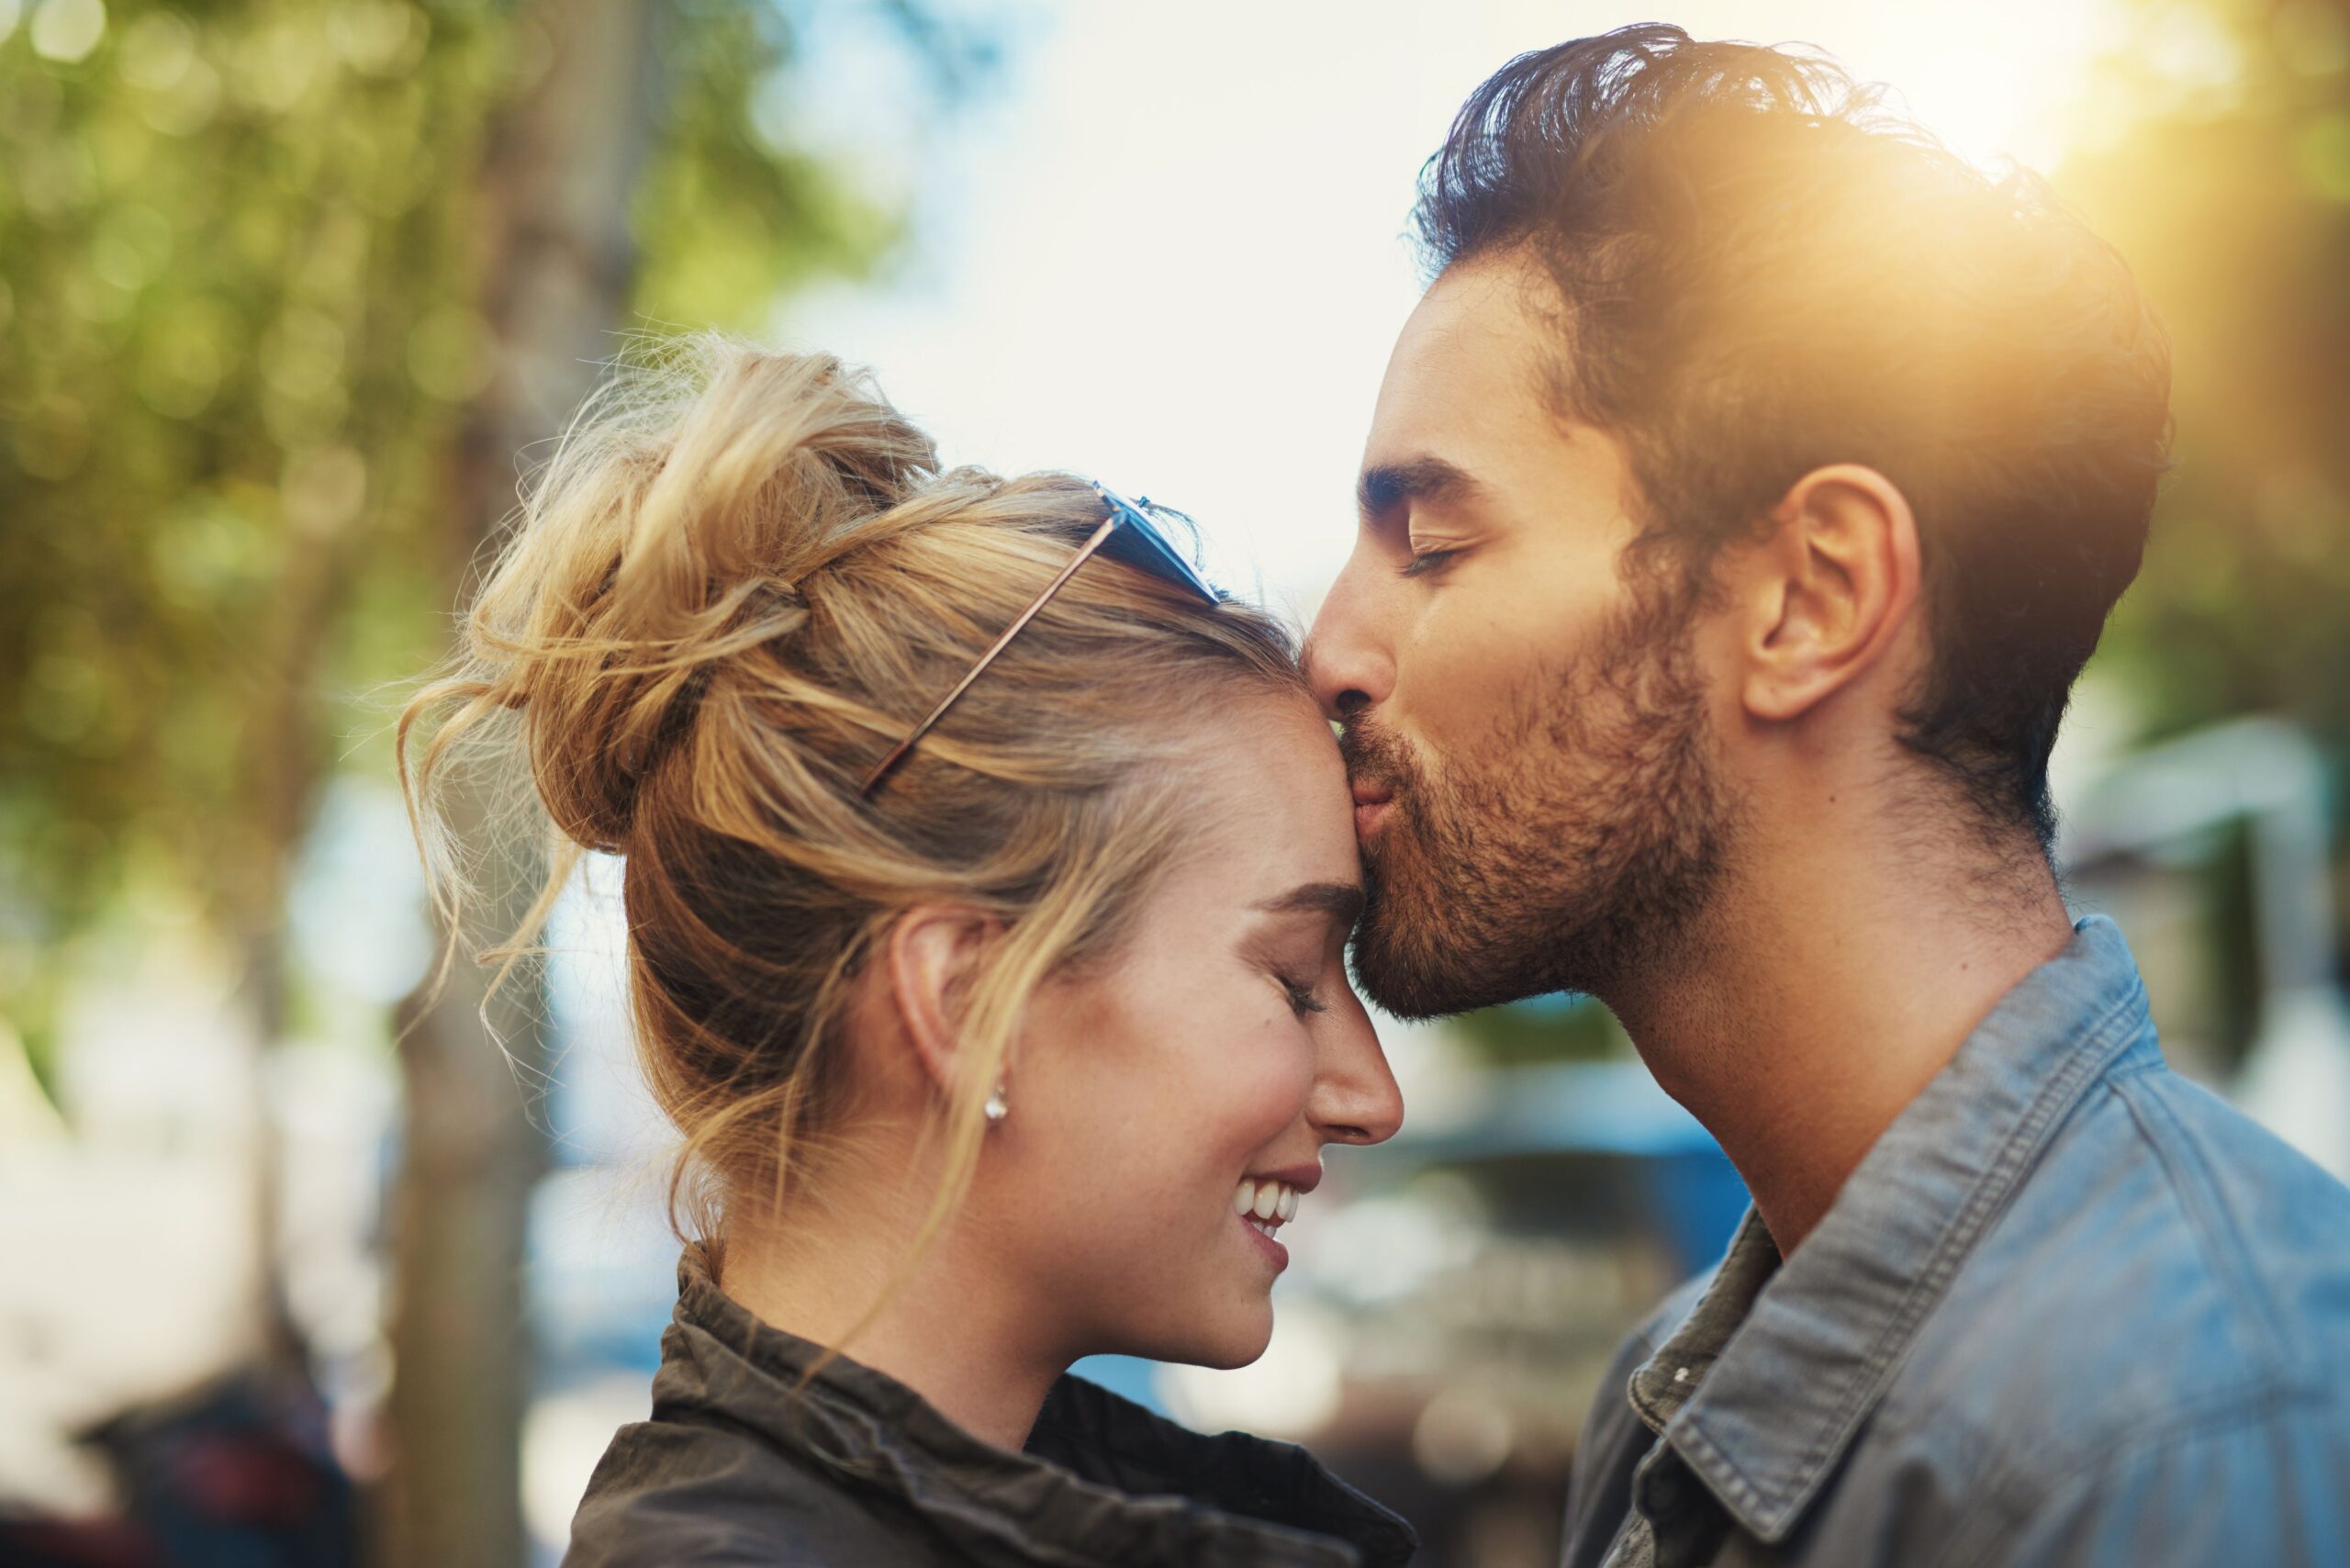 10 tips to fall even more deeply in love with your partner